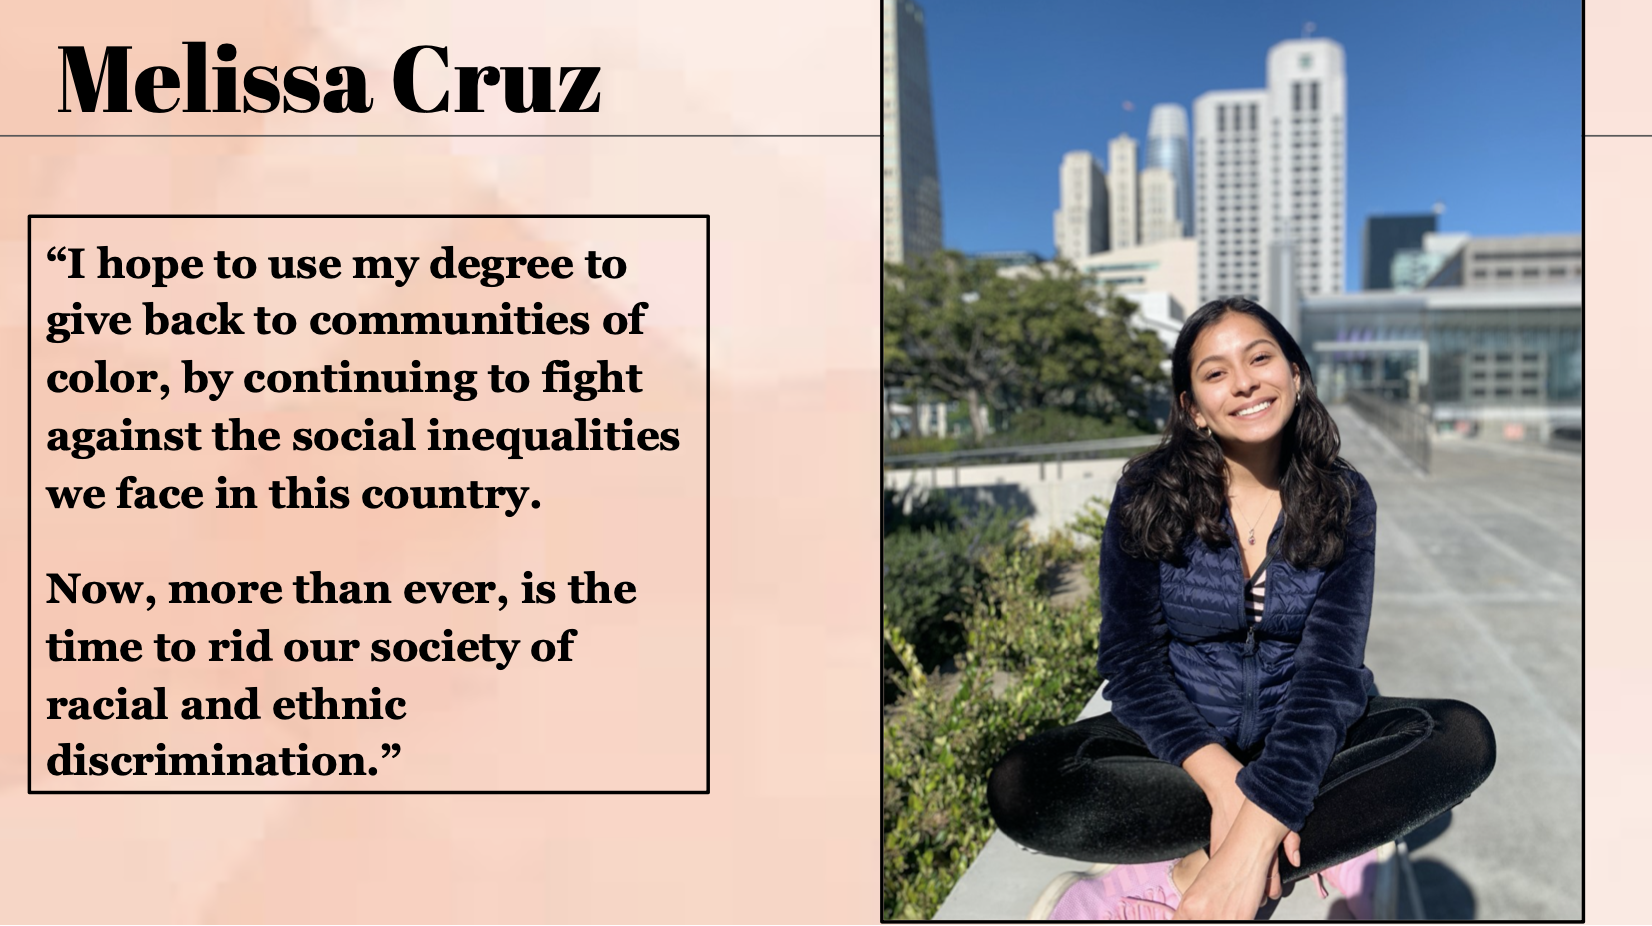 Melissa Cruz hopes to use her degree to give back to communities of color, by continuing to fight against the social inequalities we face in this country.